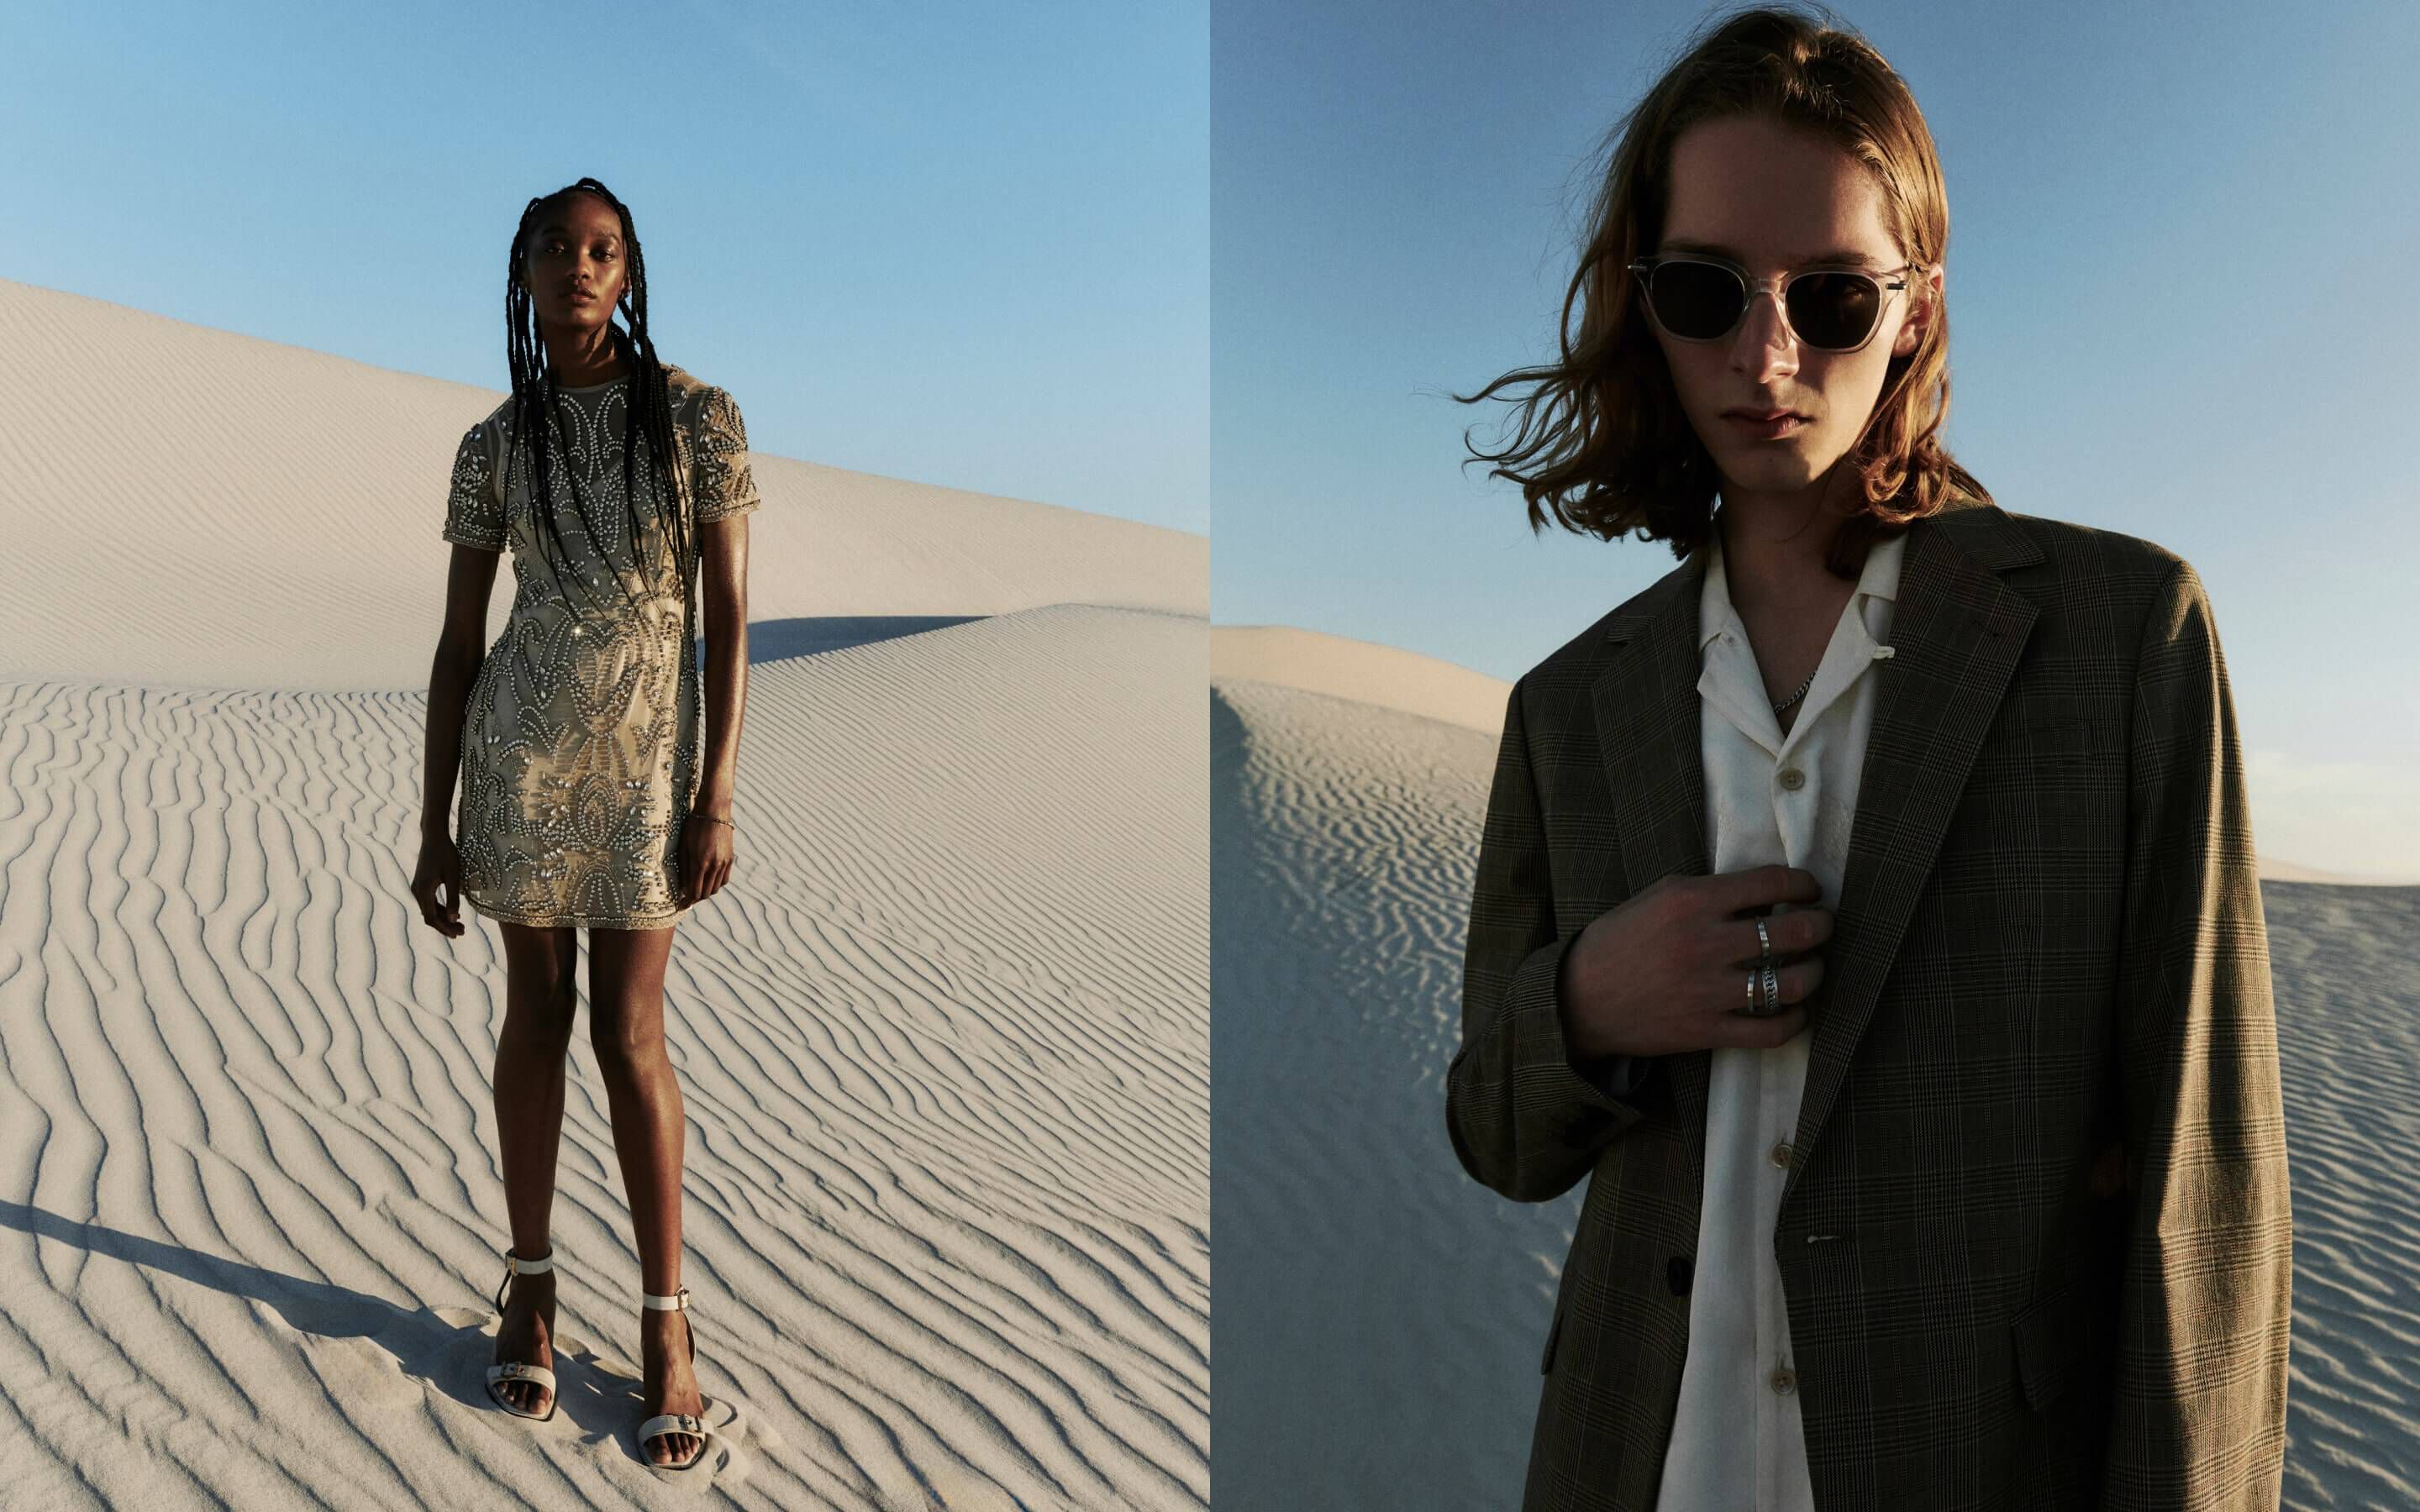 Women wearing a beige beaded dress and high heeled sandals in the desert with a man in a grey checked suit jacket and shirt with sunglasses and silver rings 